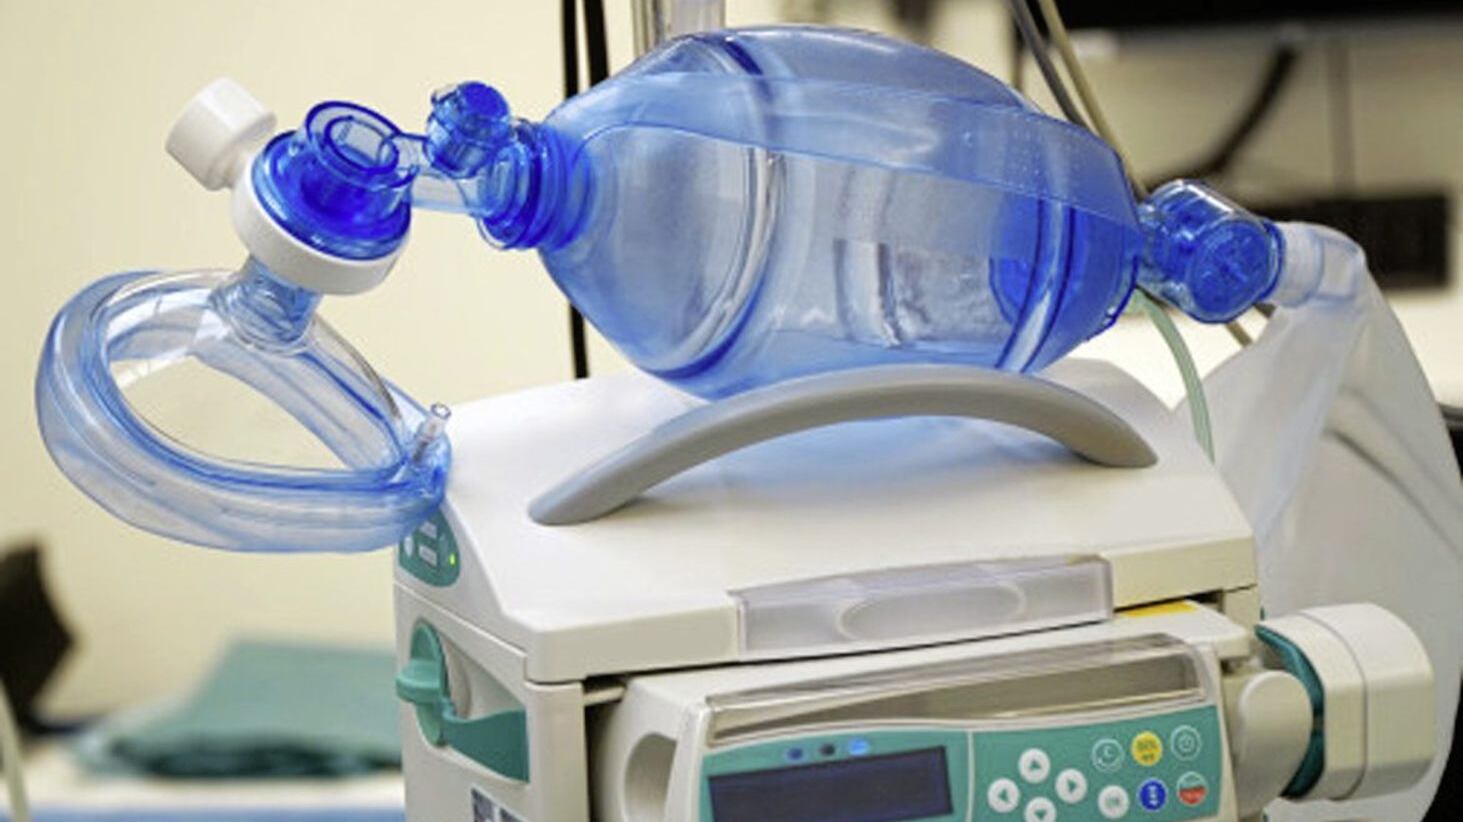 MPs asked health officials at a hearing today&nbsp;why VG70 ventilators designed for intensive care use cost about &pound;9,000 per unit in the week of March 18-24 but jumped to about &pound;50,000 each the following week